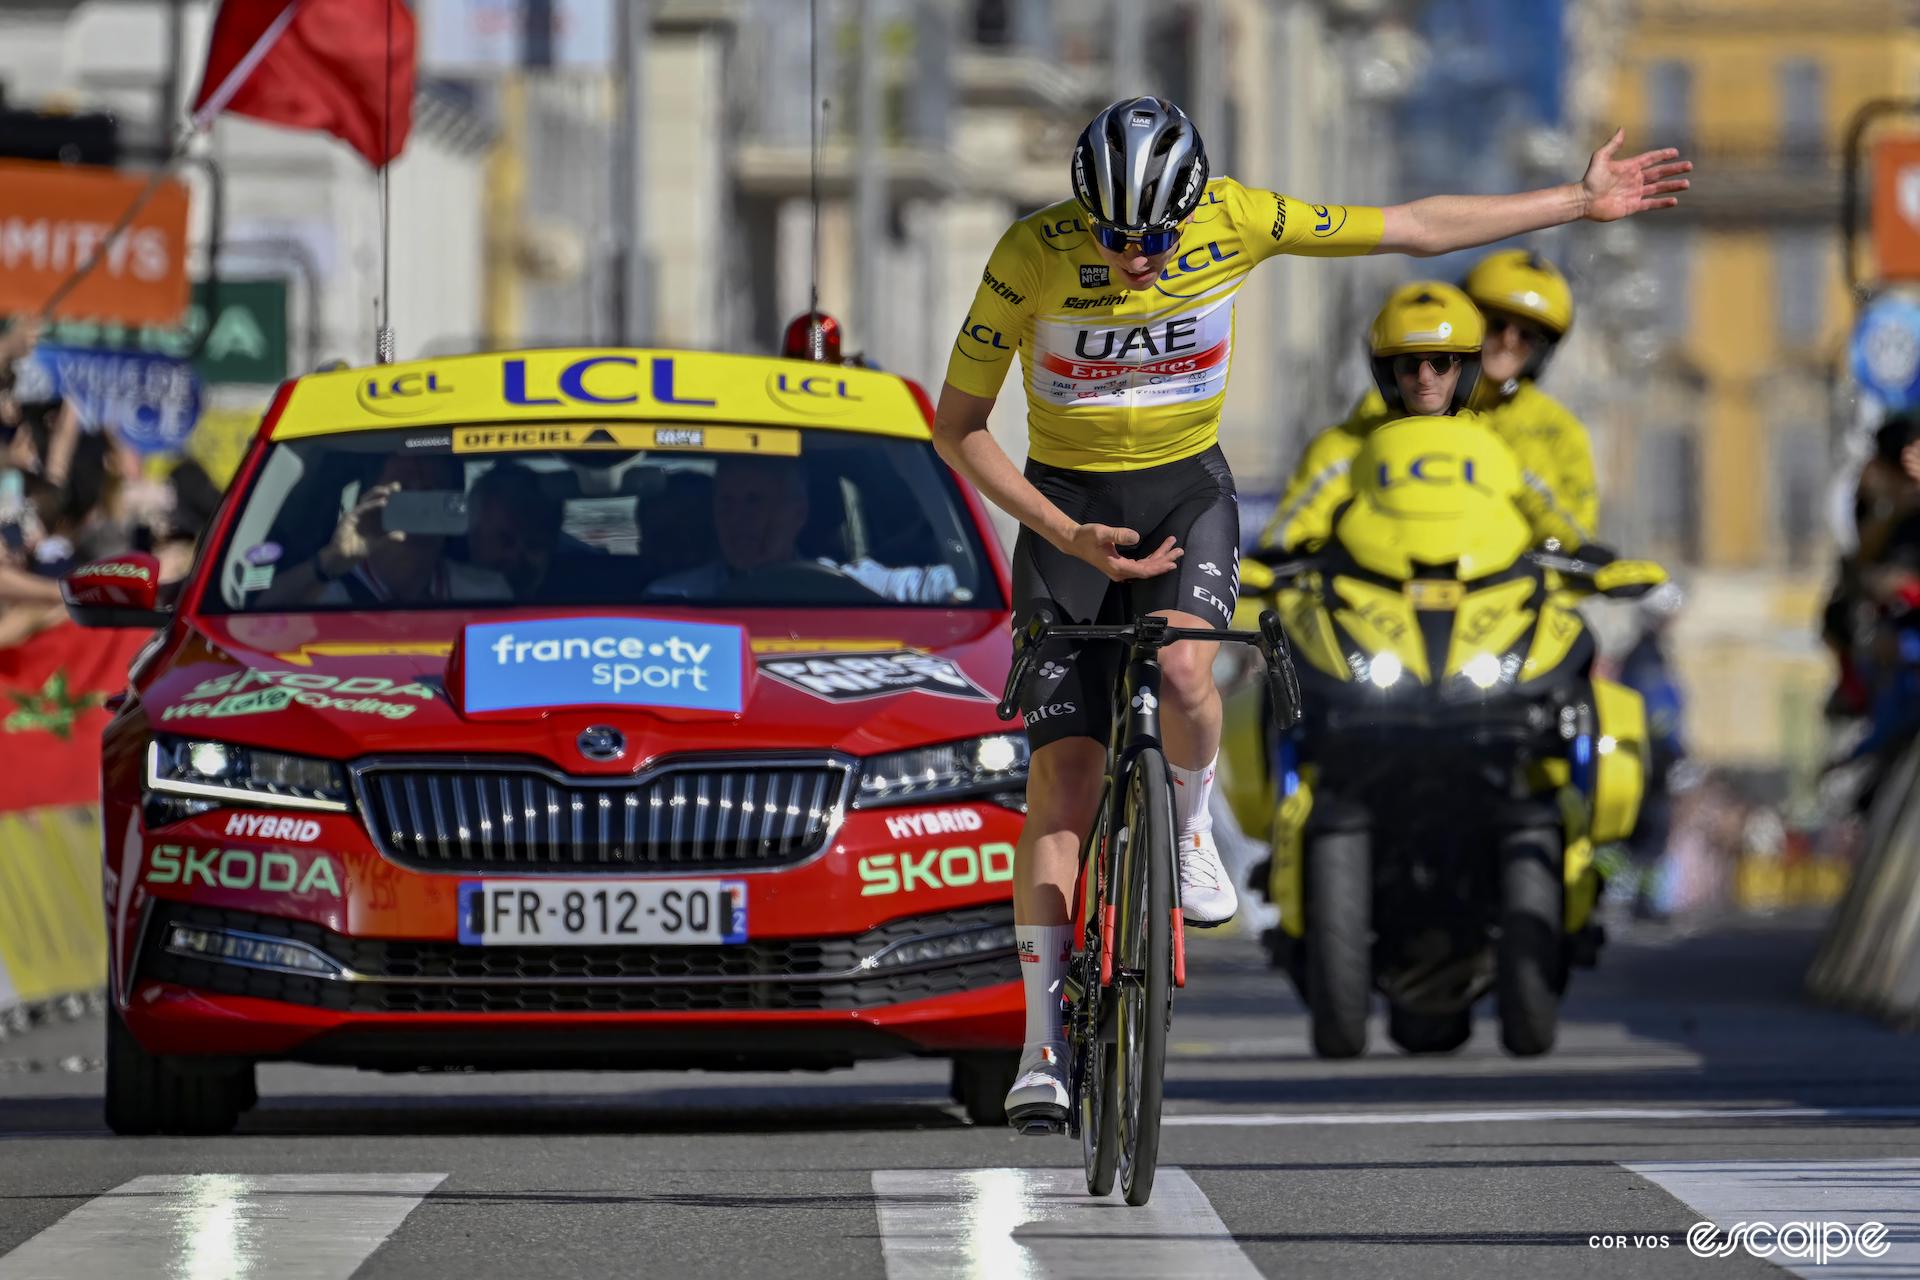 Pogačar, dressed in the yellow Paris-Nice leader's jersey, takes a bow as he wins a stage solo. 